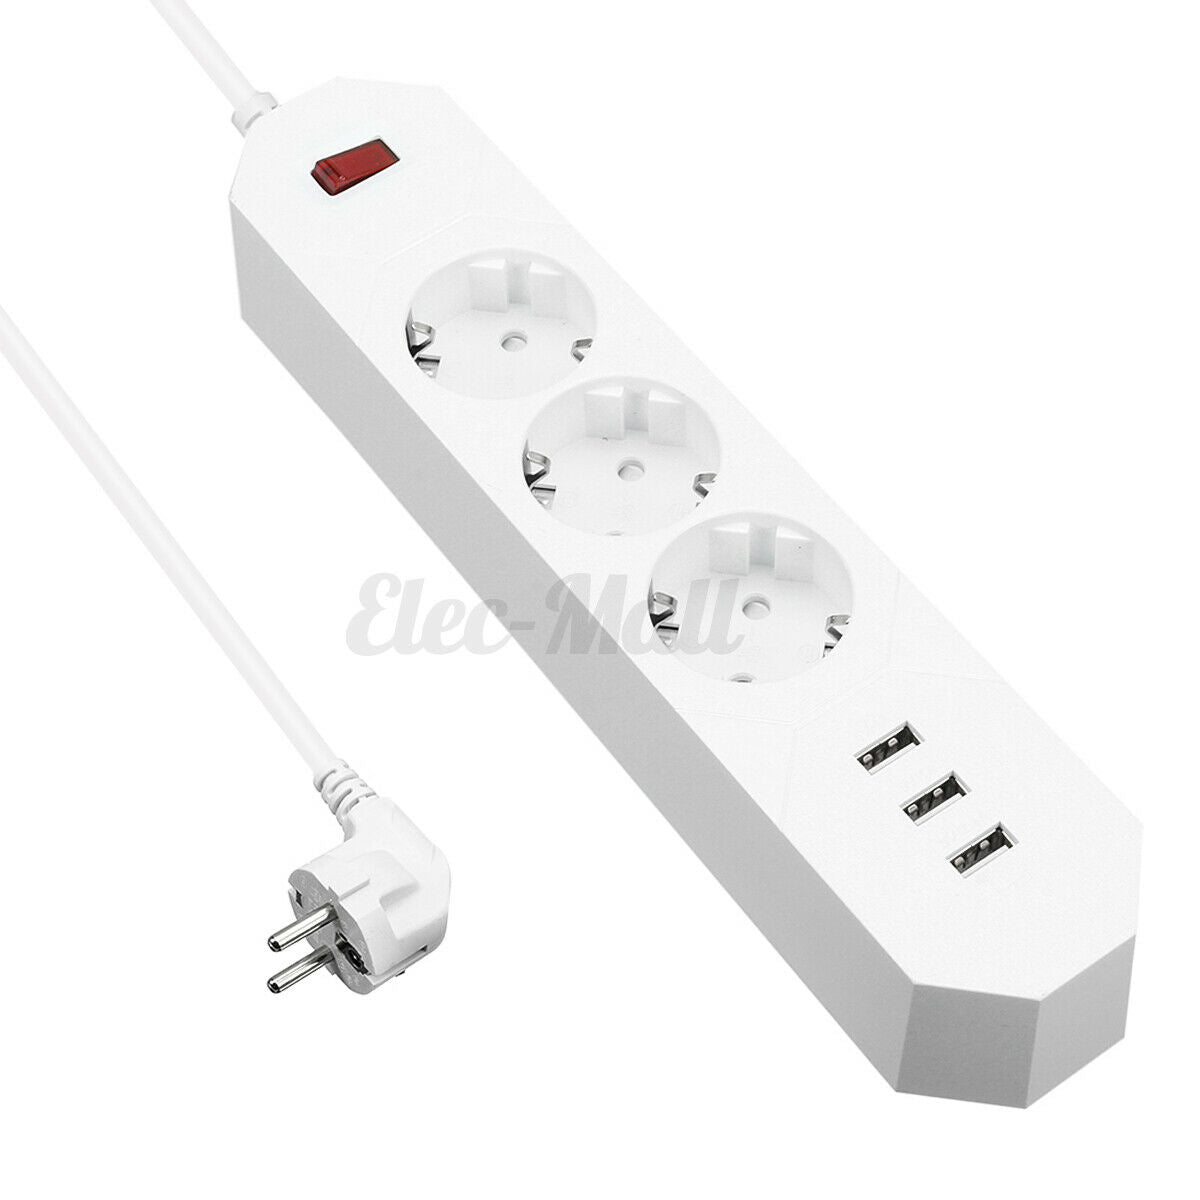 1.8M 3 Outlet Power Strip Surge Protector with 3 USB Ports Lightningproof Socket